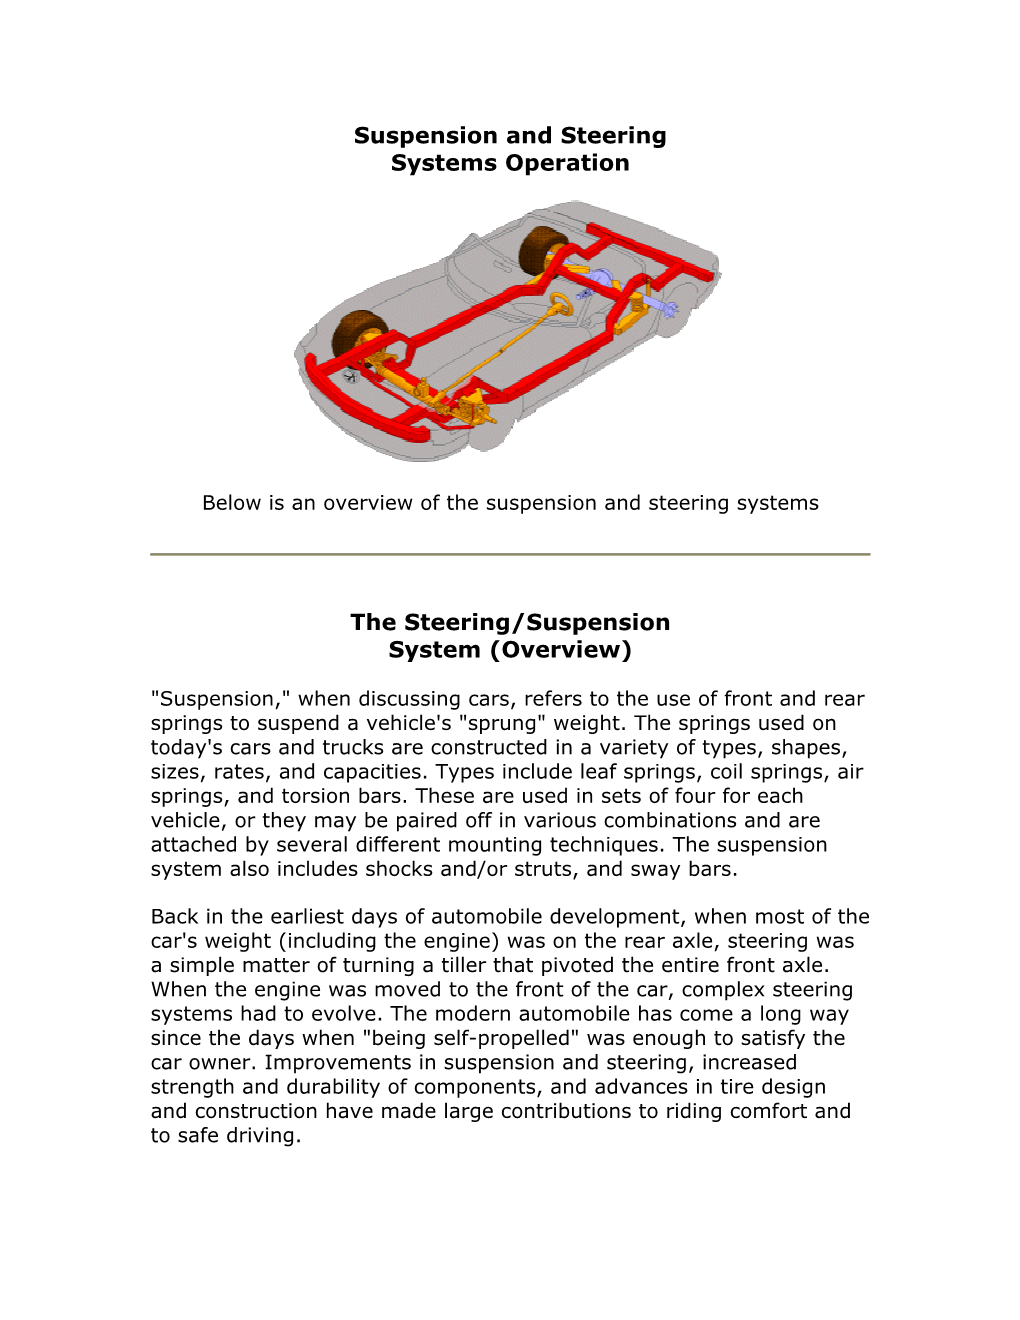 Suspension and Steering Systems Operation